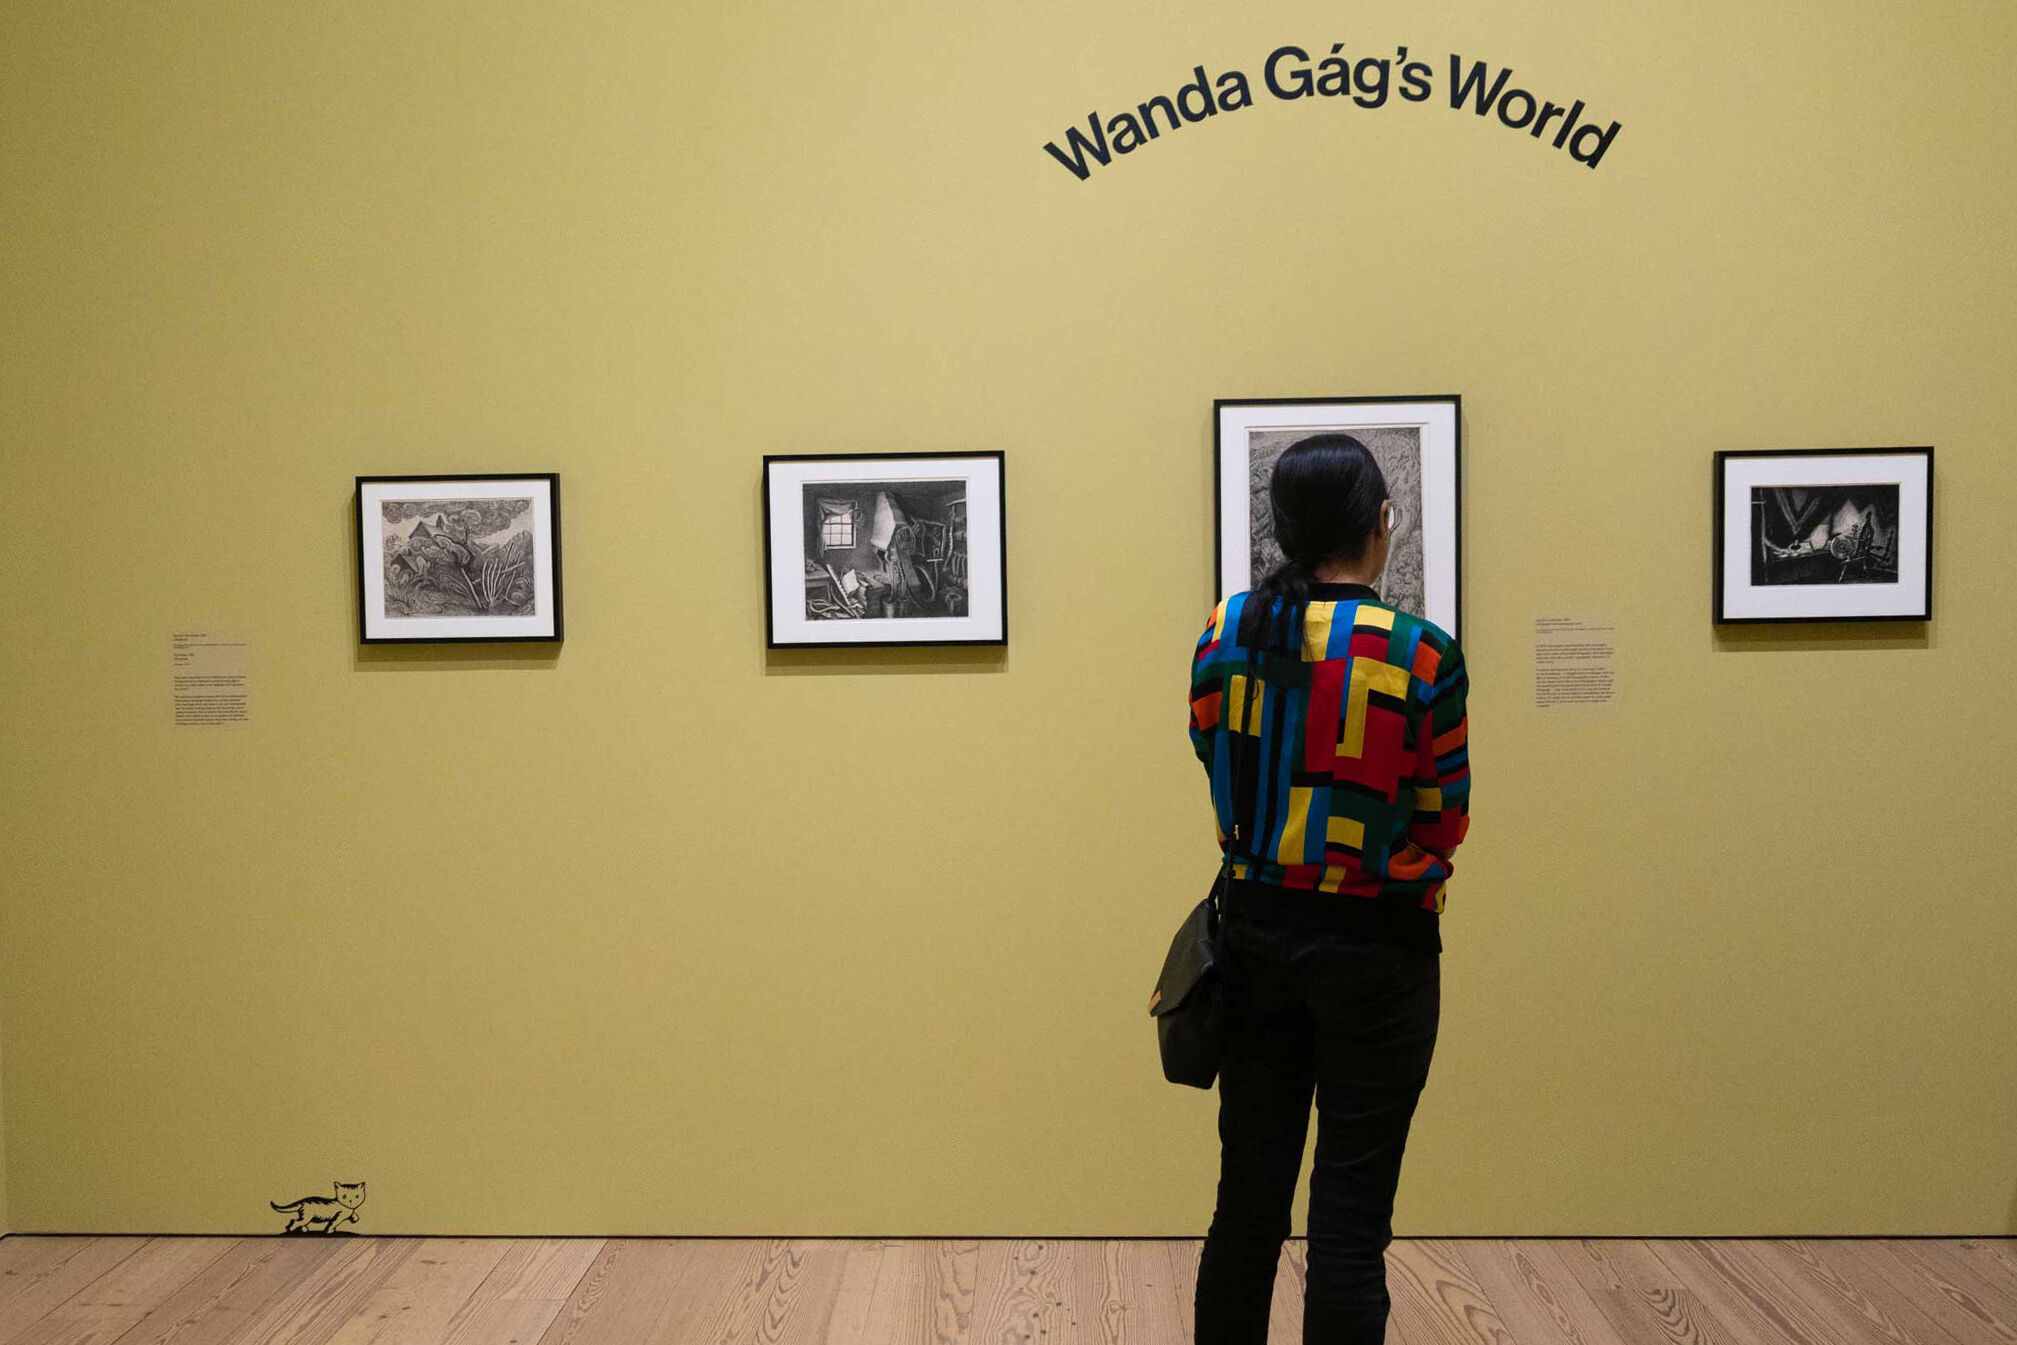 Person in a colorful shirt views framed black-and-white artwork in a gallery titled "Wanda Gág's World" with yellow walls and wooden floors.